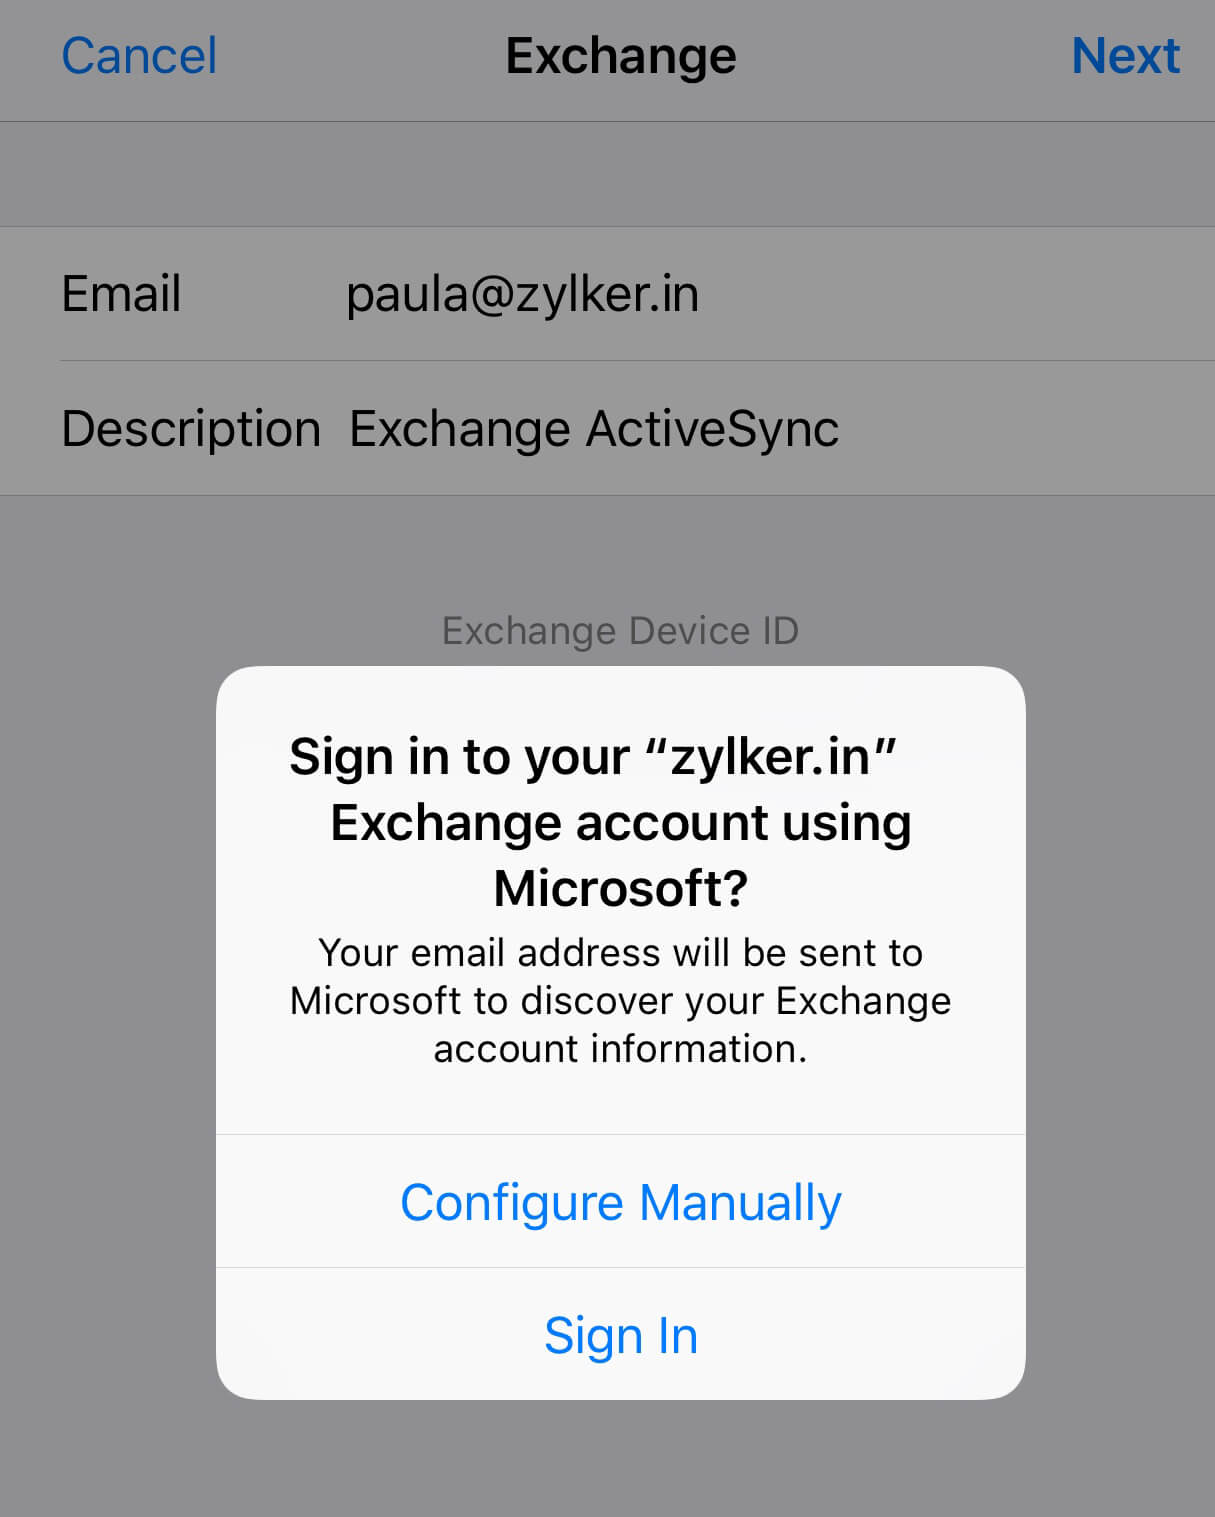 Sync calendars on your mobile device using Exchange ActiveSync